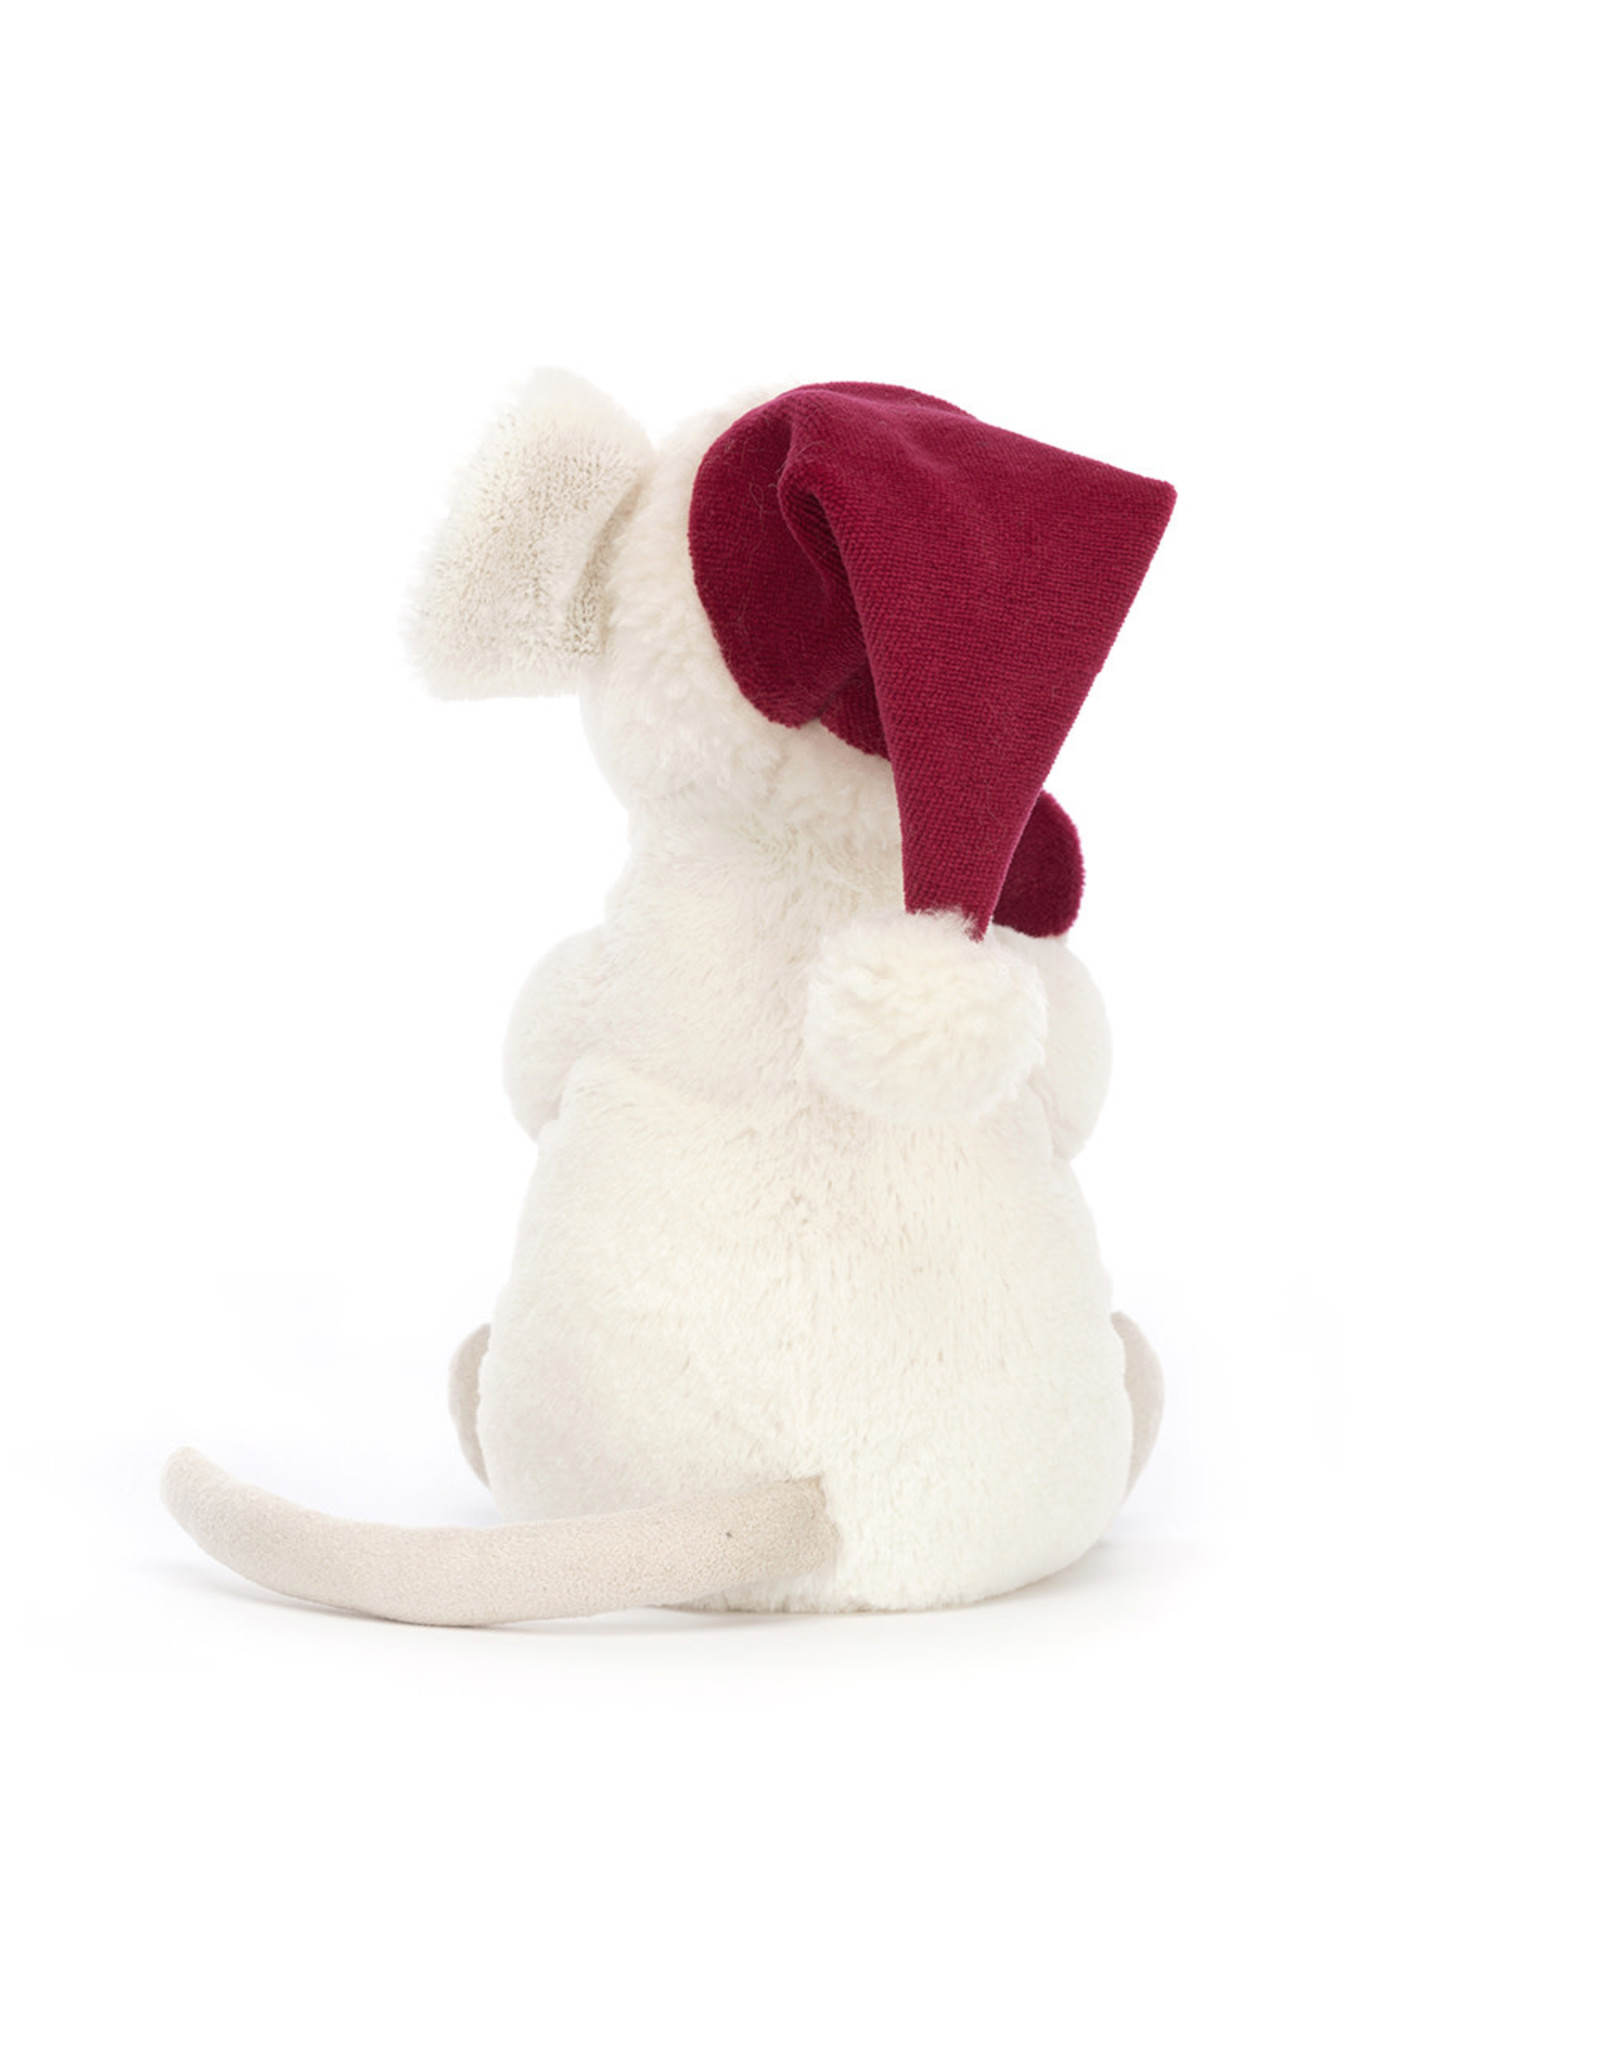 Jellycat Merry Mouse with Candy Cane